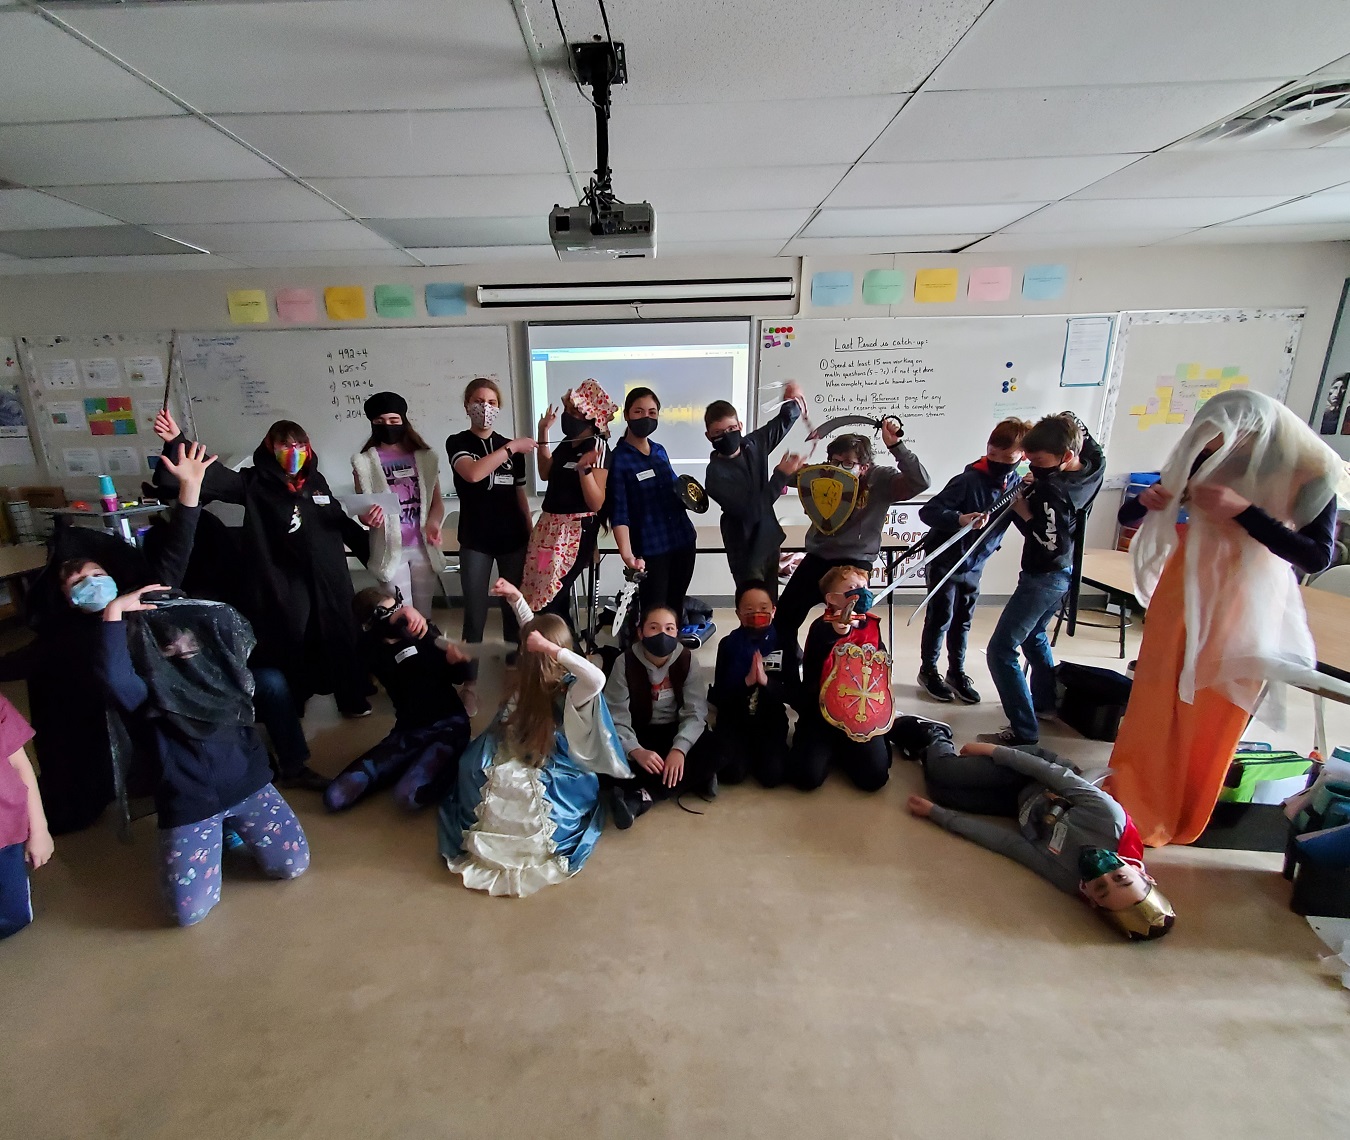 A group of students dressed in costumes act out a scene from a Shakespeare play.